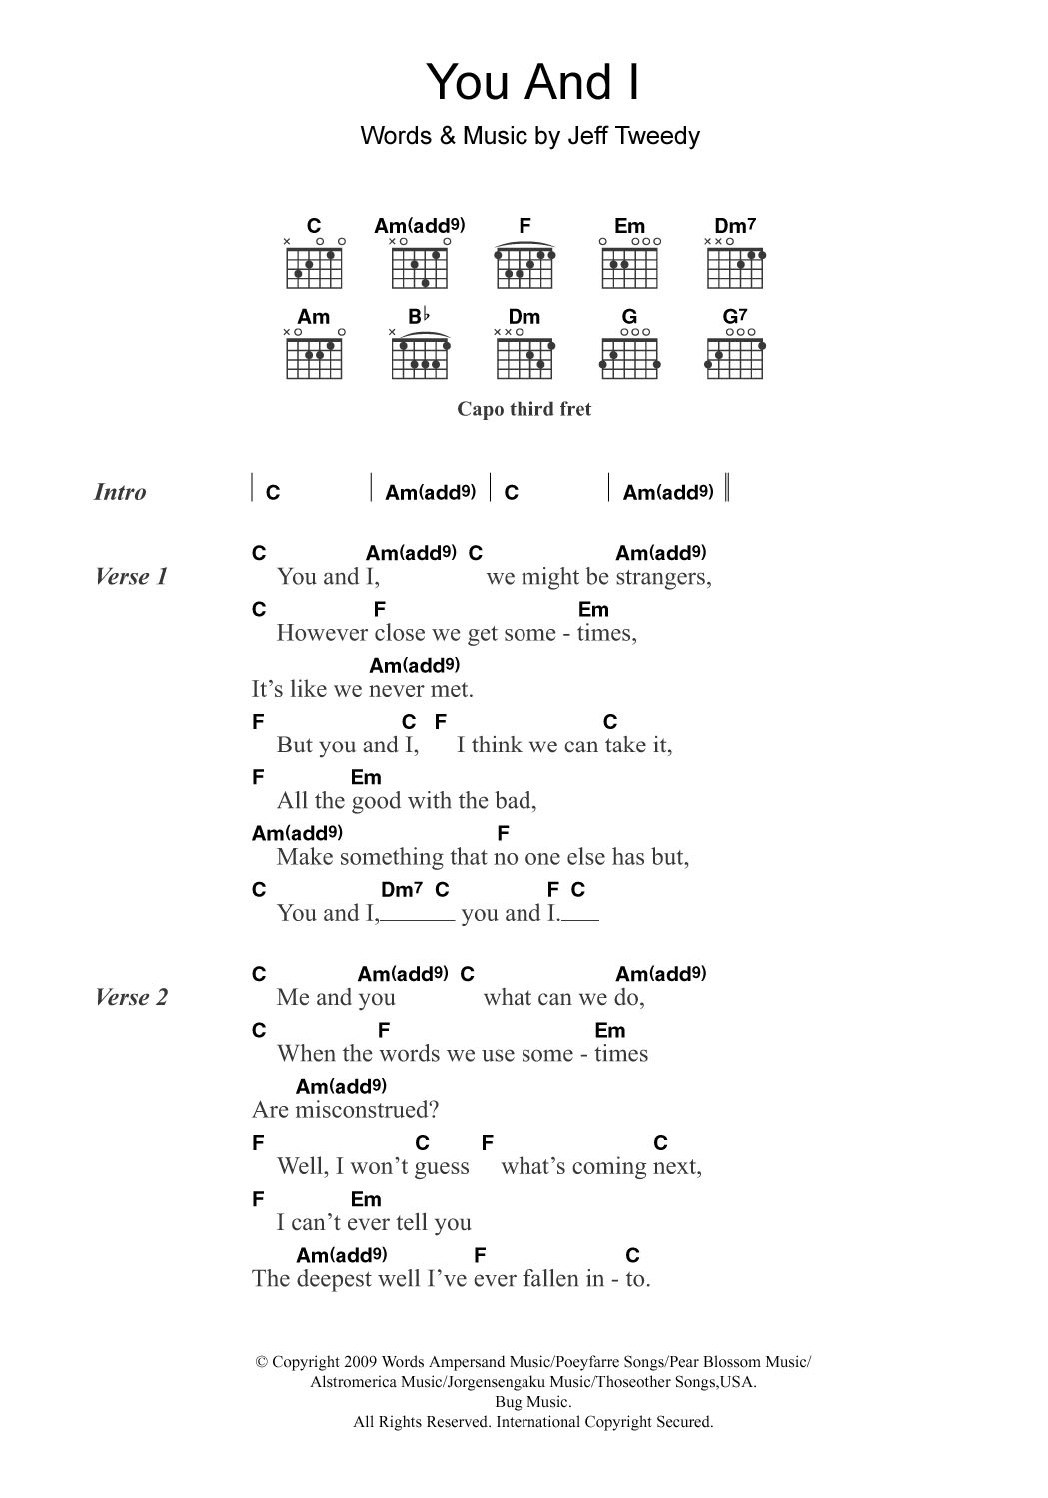 Download Wilco You And I (featuring Feist) Sheet Music